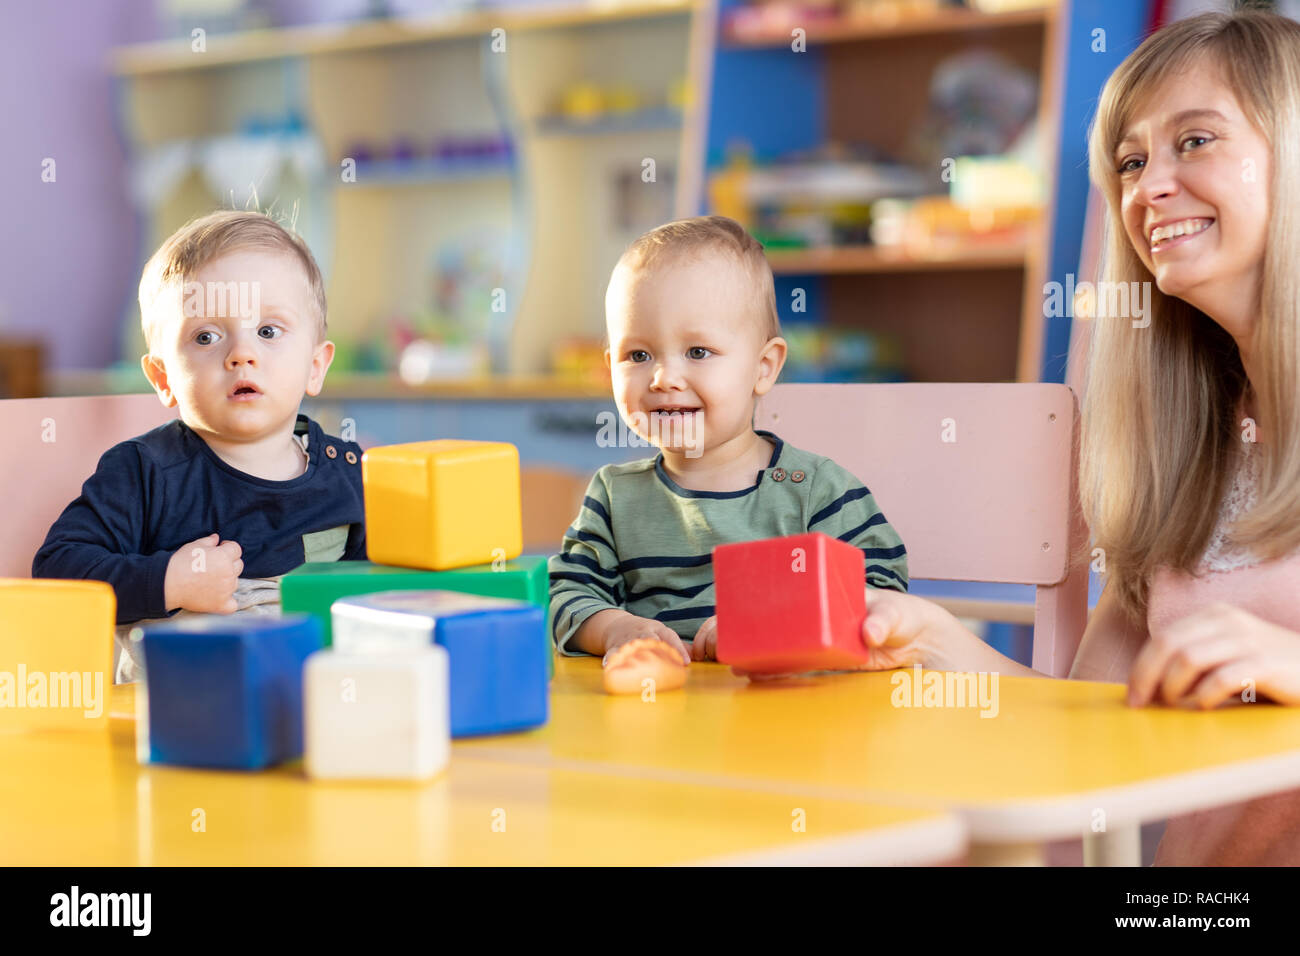 Cute woman and smiling kids playing educational toys at kindergarten or nursery room Stock Photo